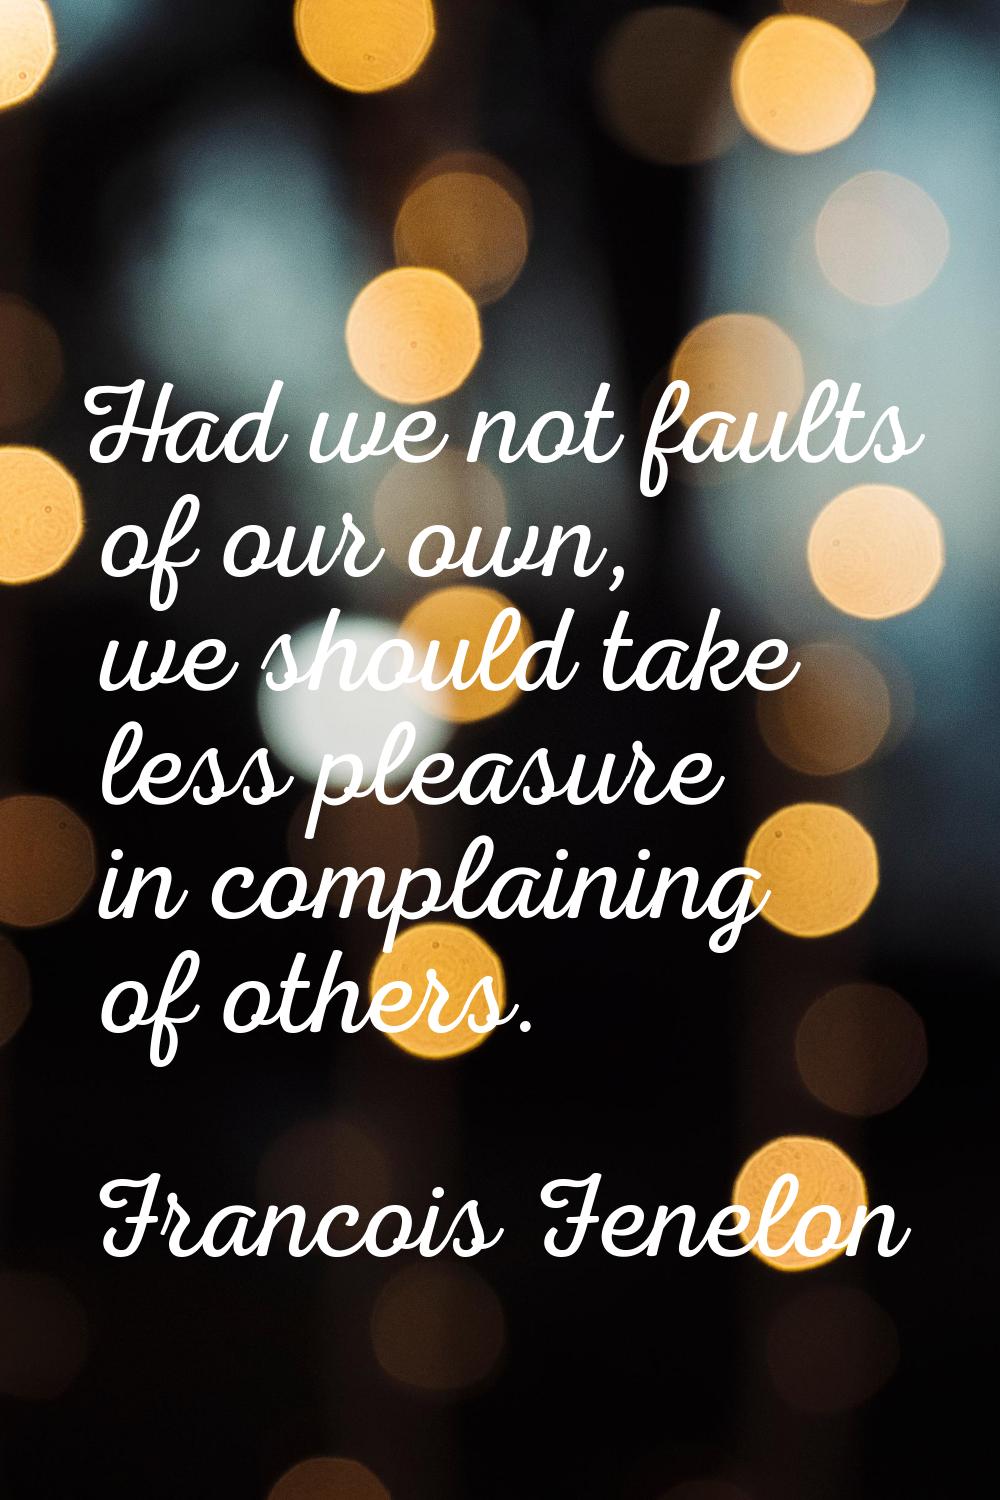 Had we not faults of our own, we should take less pleasure in complaining of others.